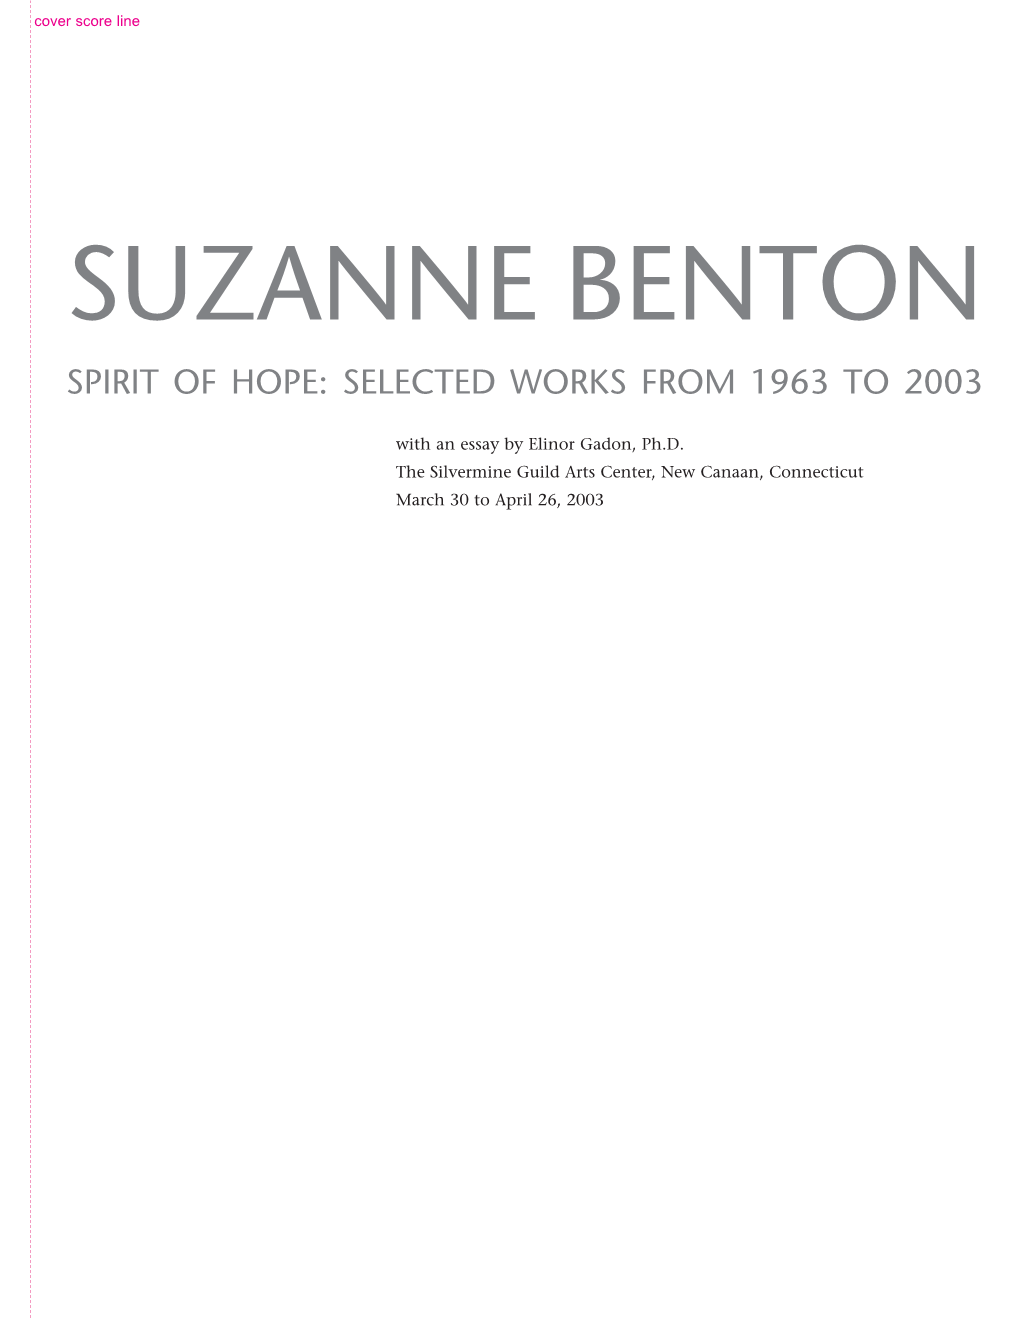 Selected Works from 1963 to 2003